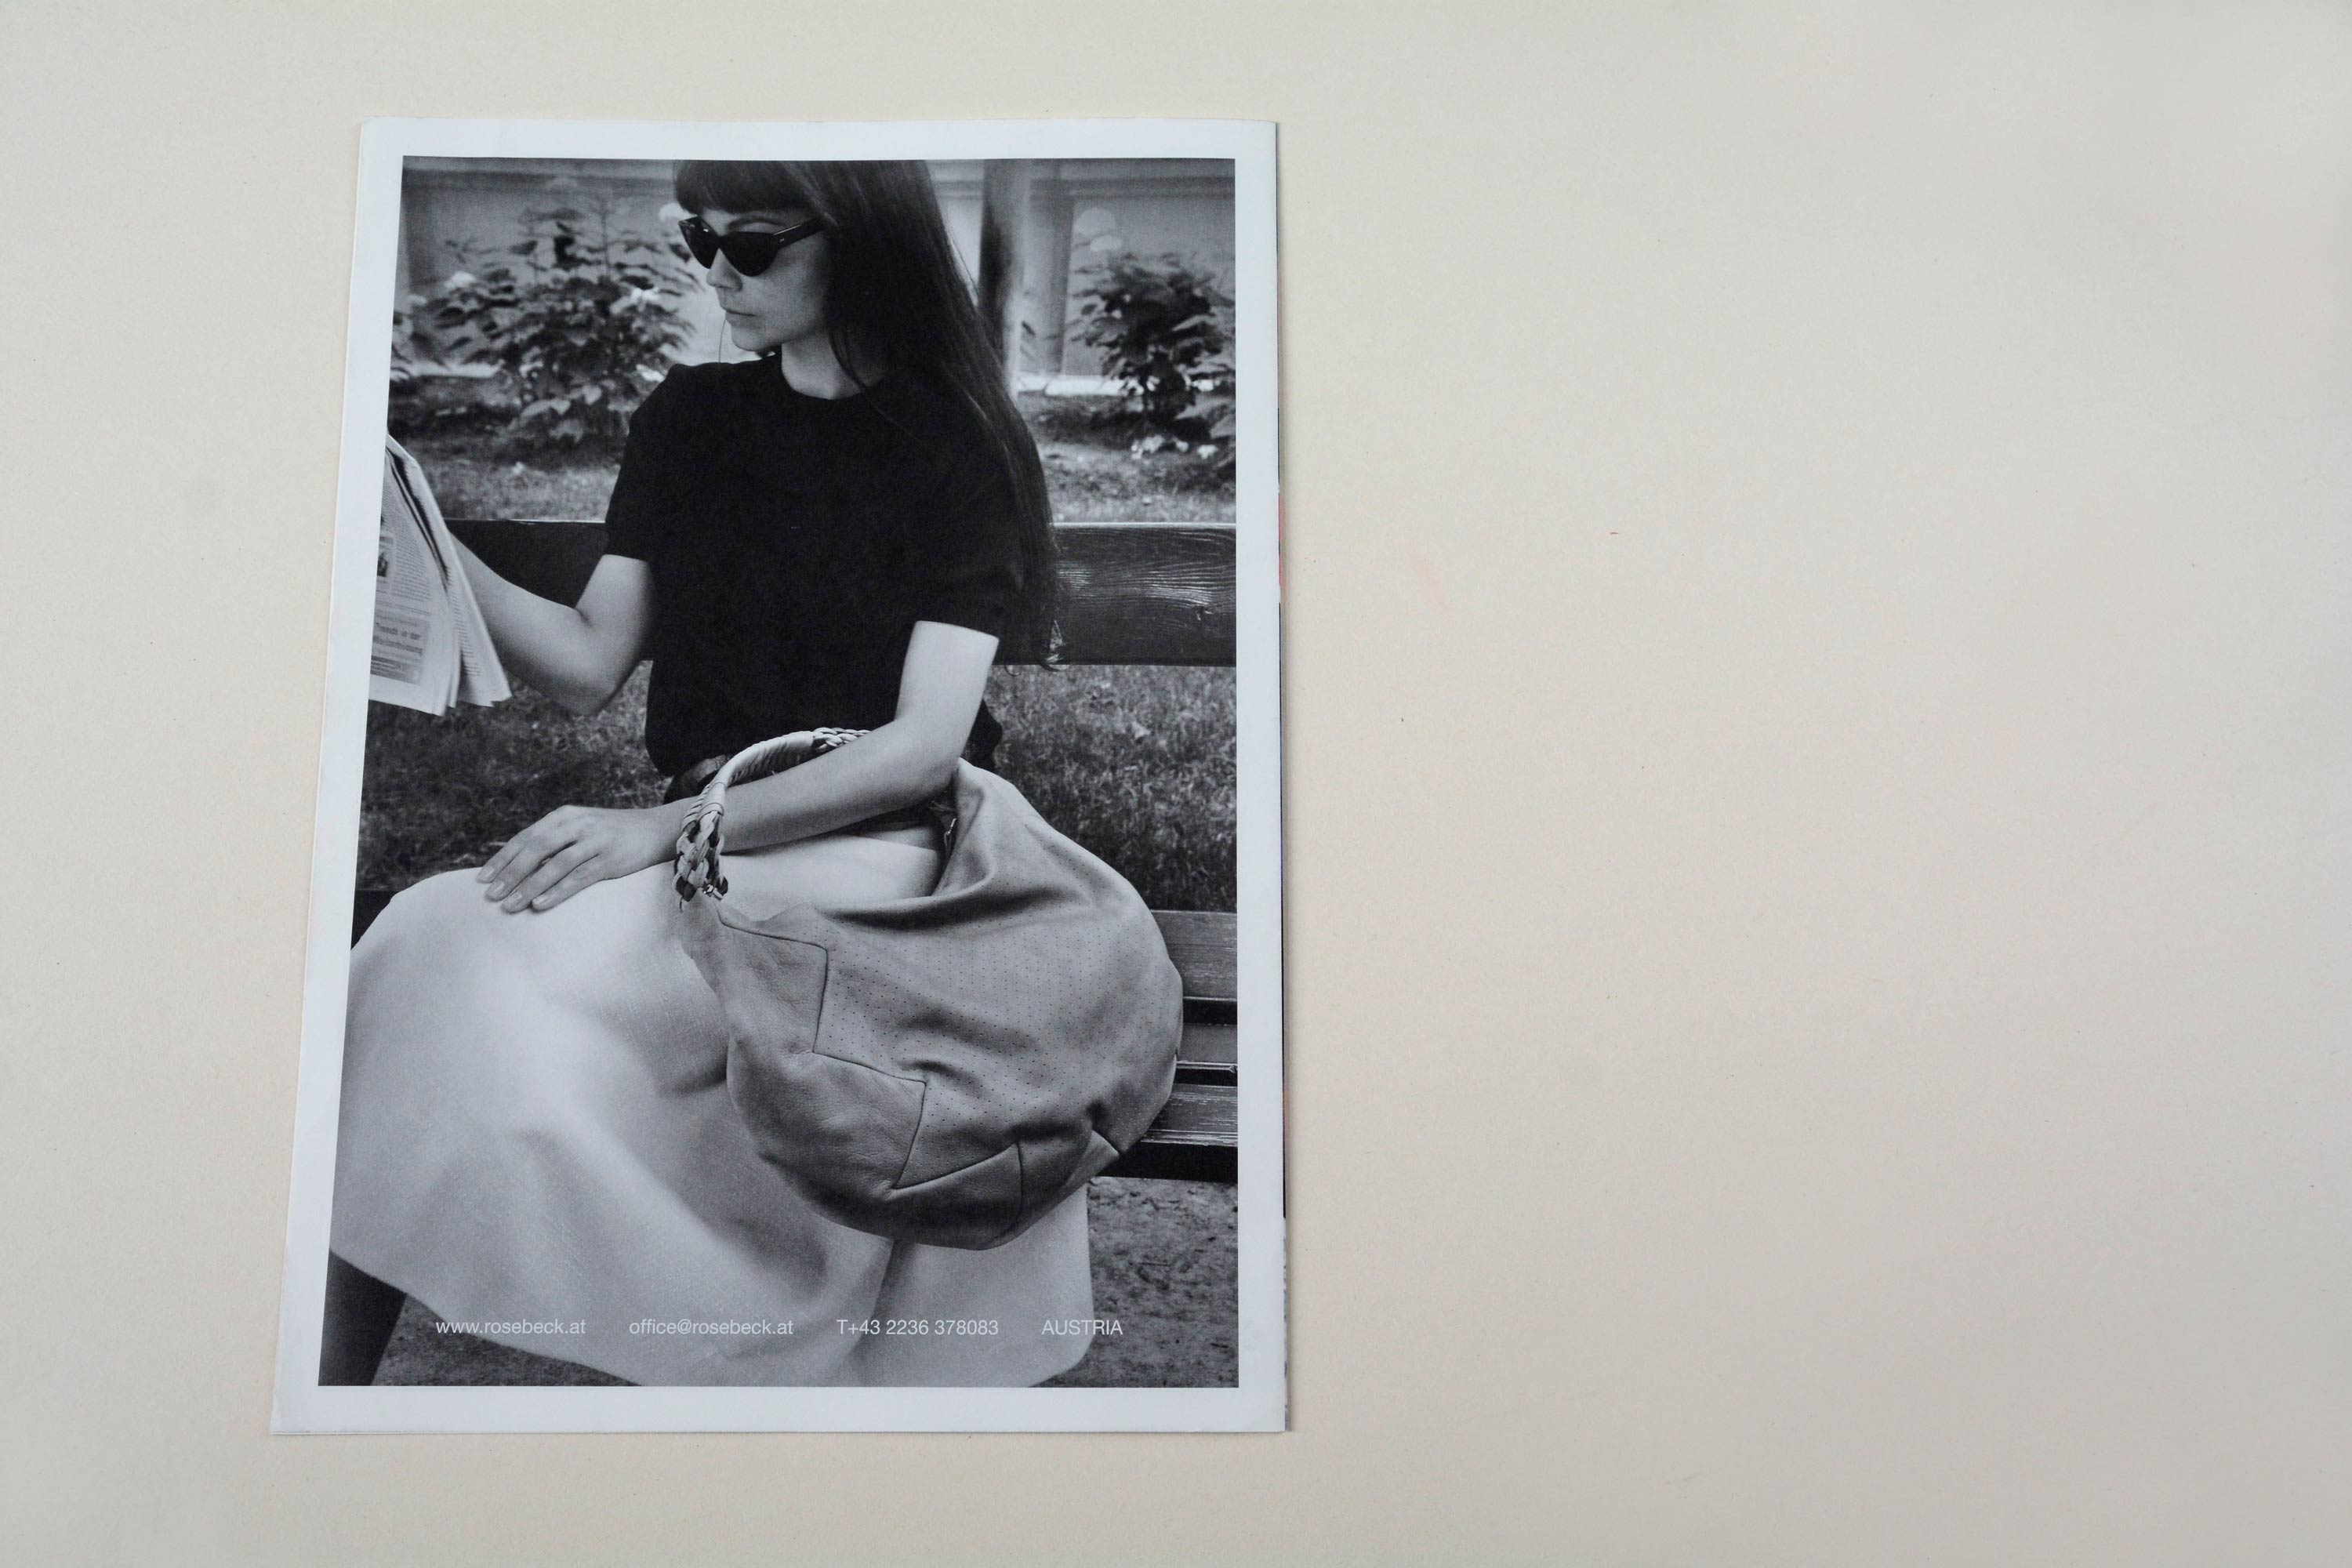 Back catalogue. Full-page b/w photo with white space around. Woman sitting on park bench with large handbag around her arm. Row of small text at bottom overlayed.